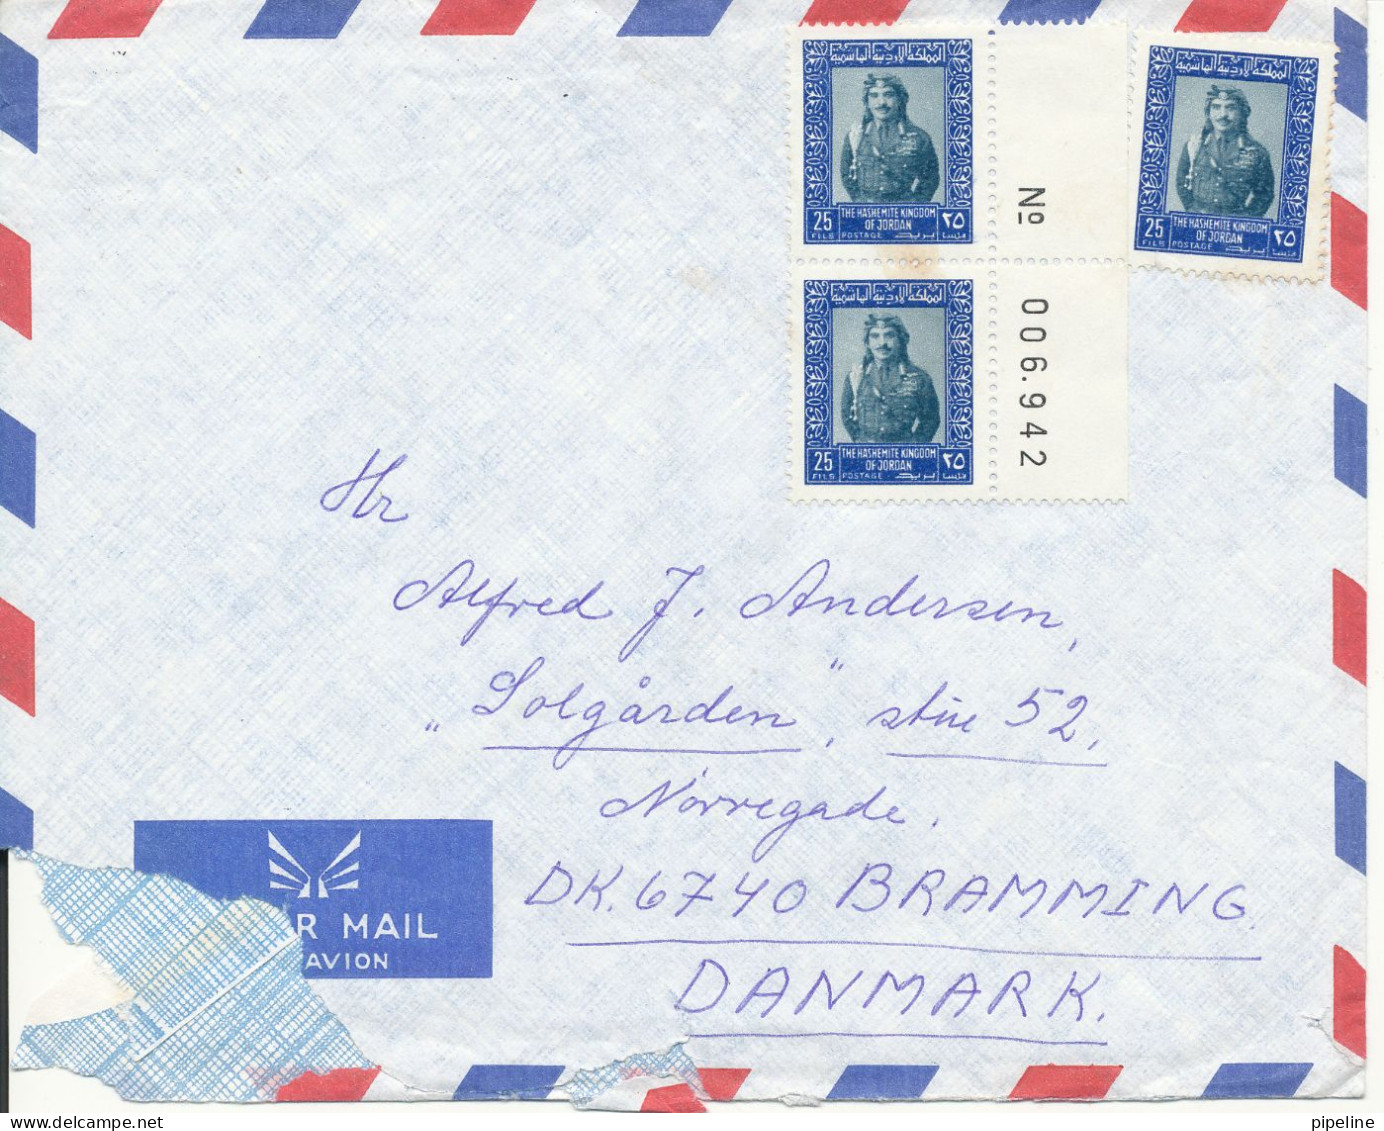 Jordan Air Mail Cover Sent To Denmark 1977 ? No Postmark On The Stamps (sent From UNRWA Temp H.Q.) Cover Damaged In The - Jordan